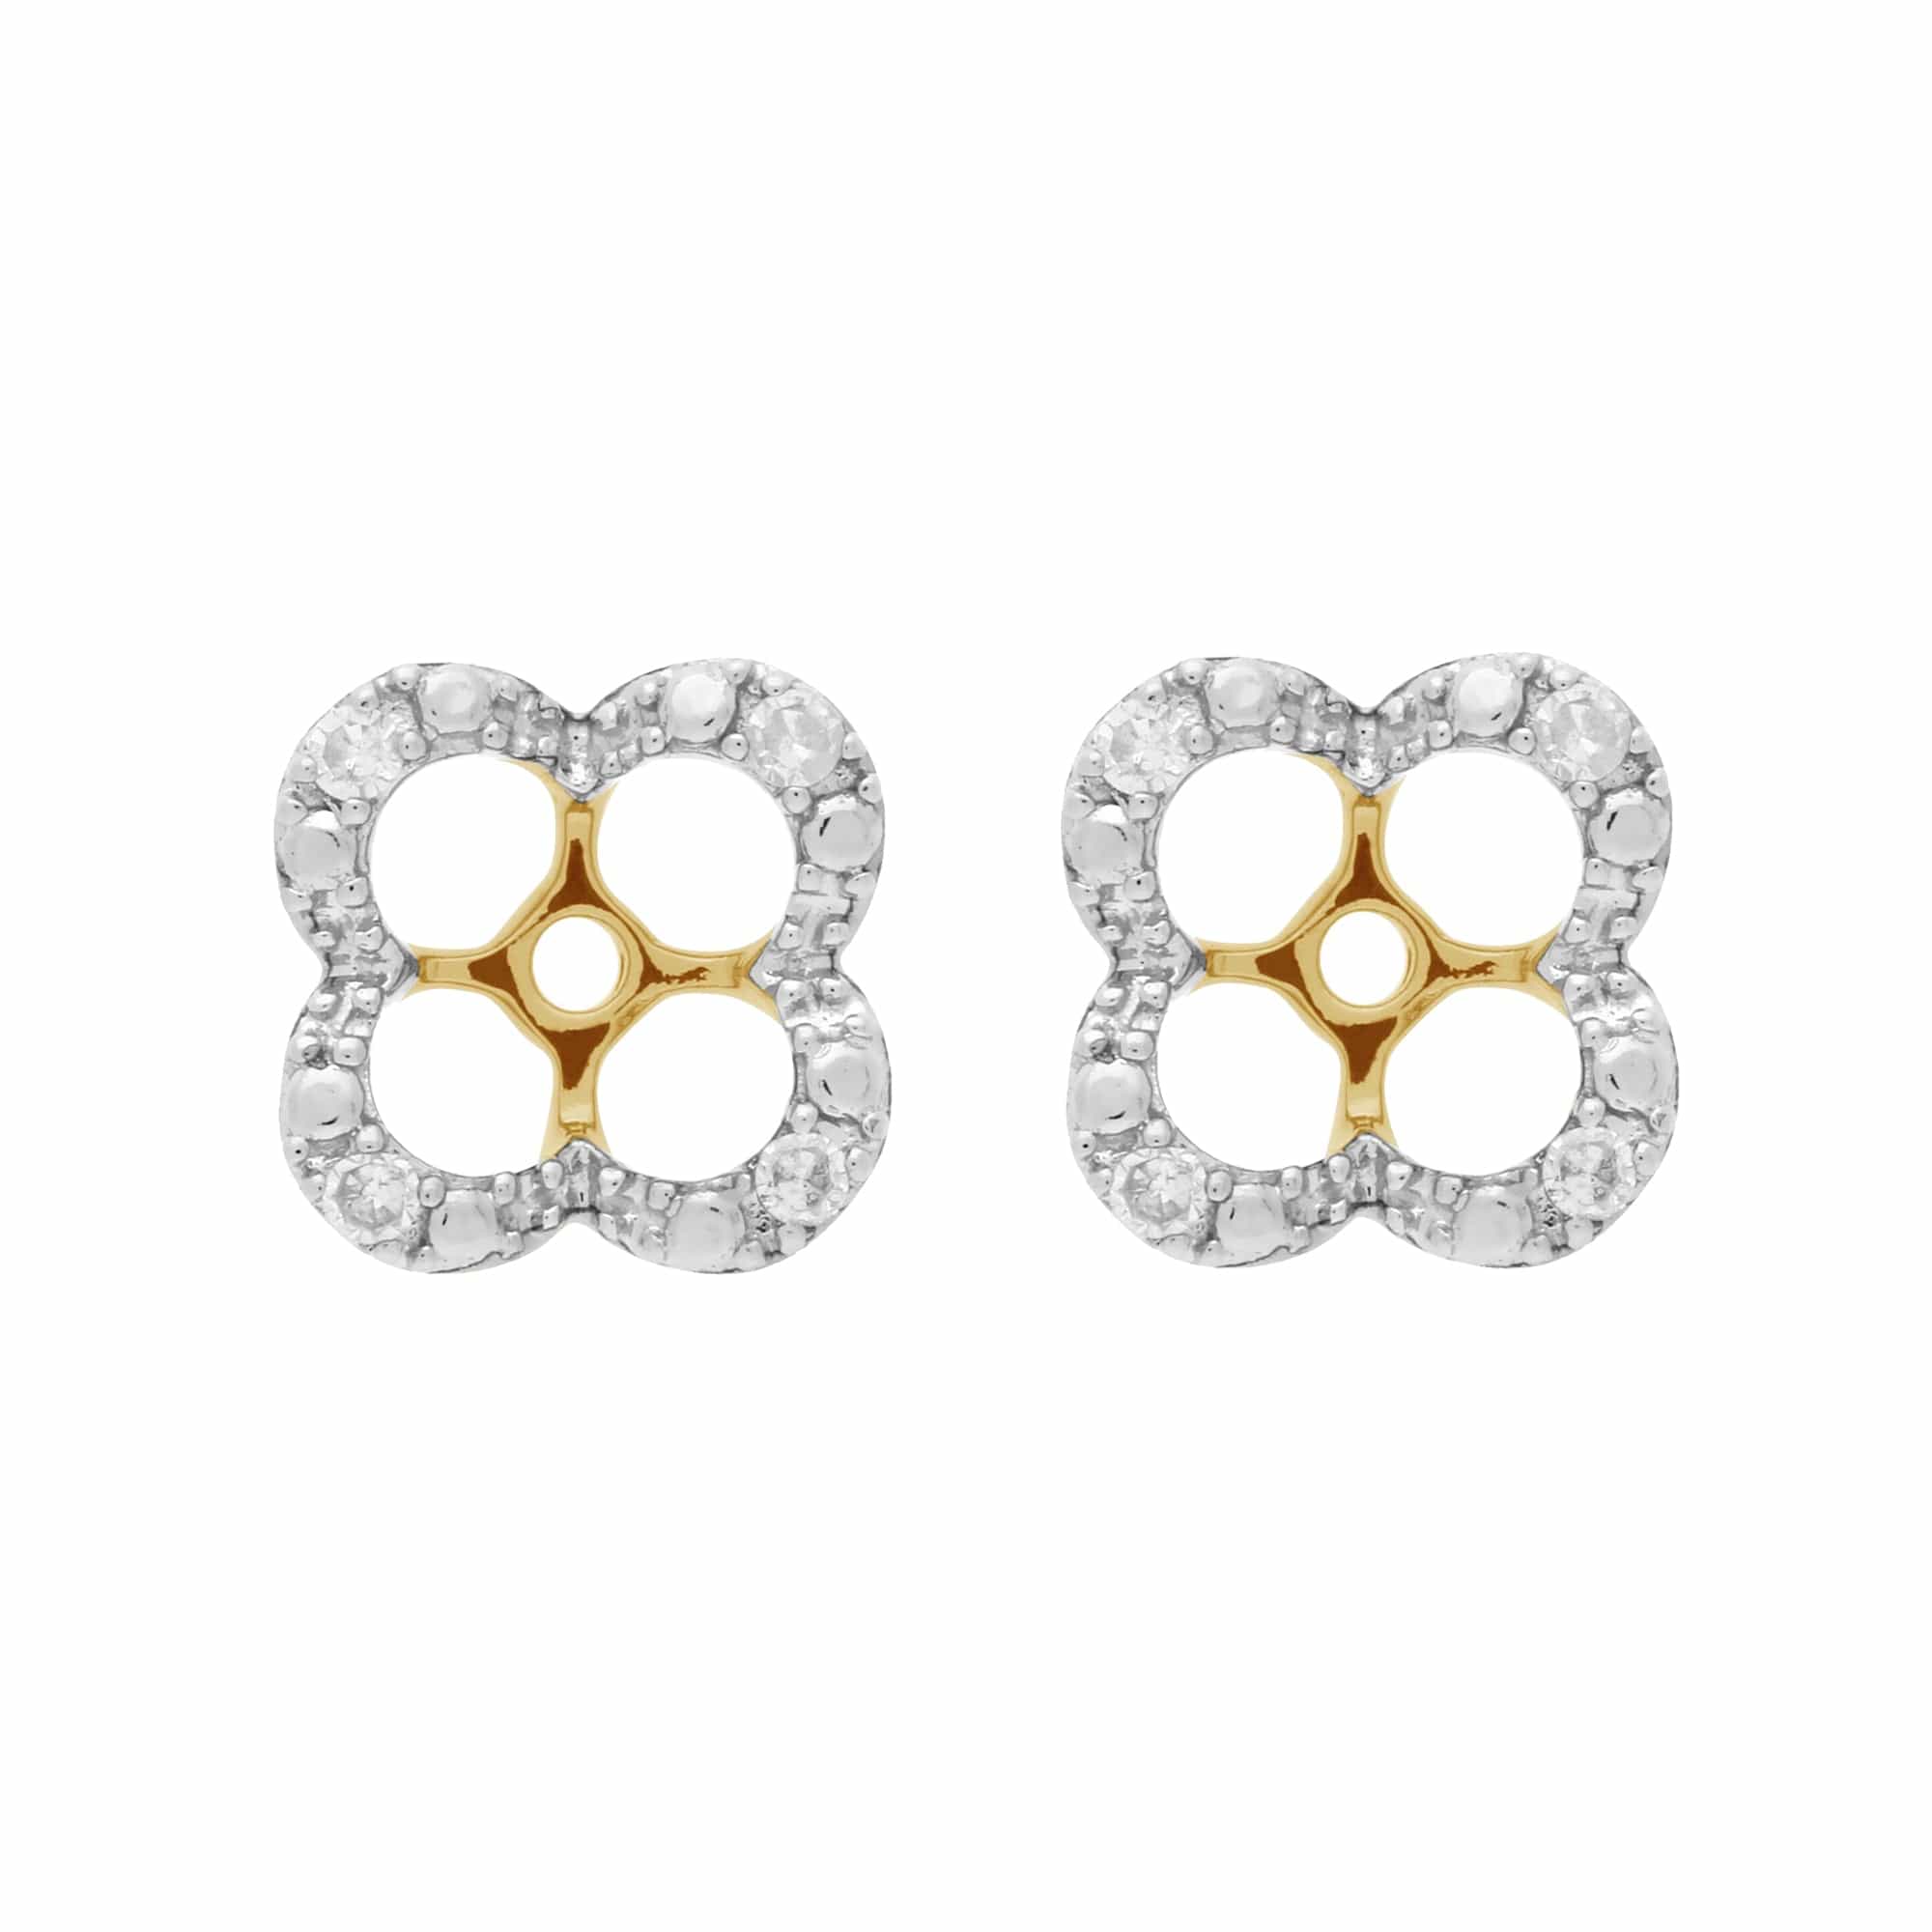 Classic Round Dark Blue Sapphire Studs with Detachable Diamond Floral Ear Jacket in 9ct Yellow Gold - Gemondo